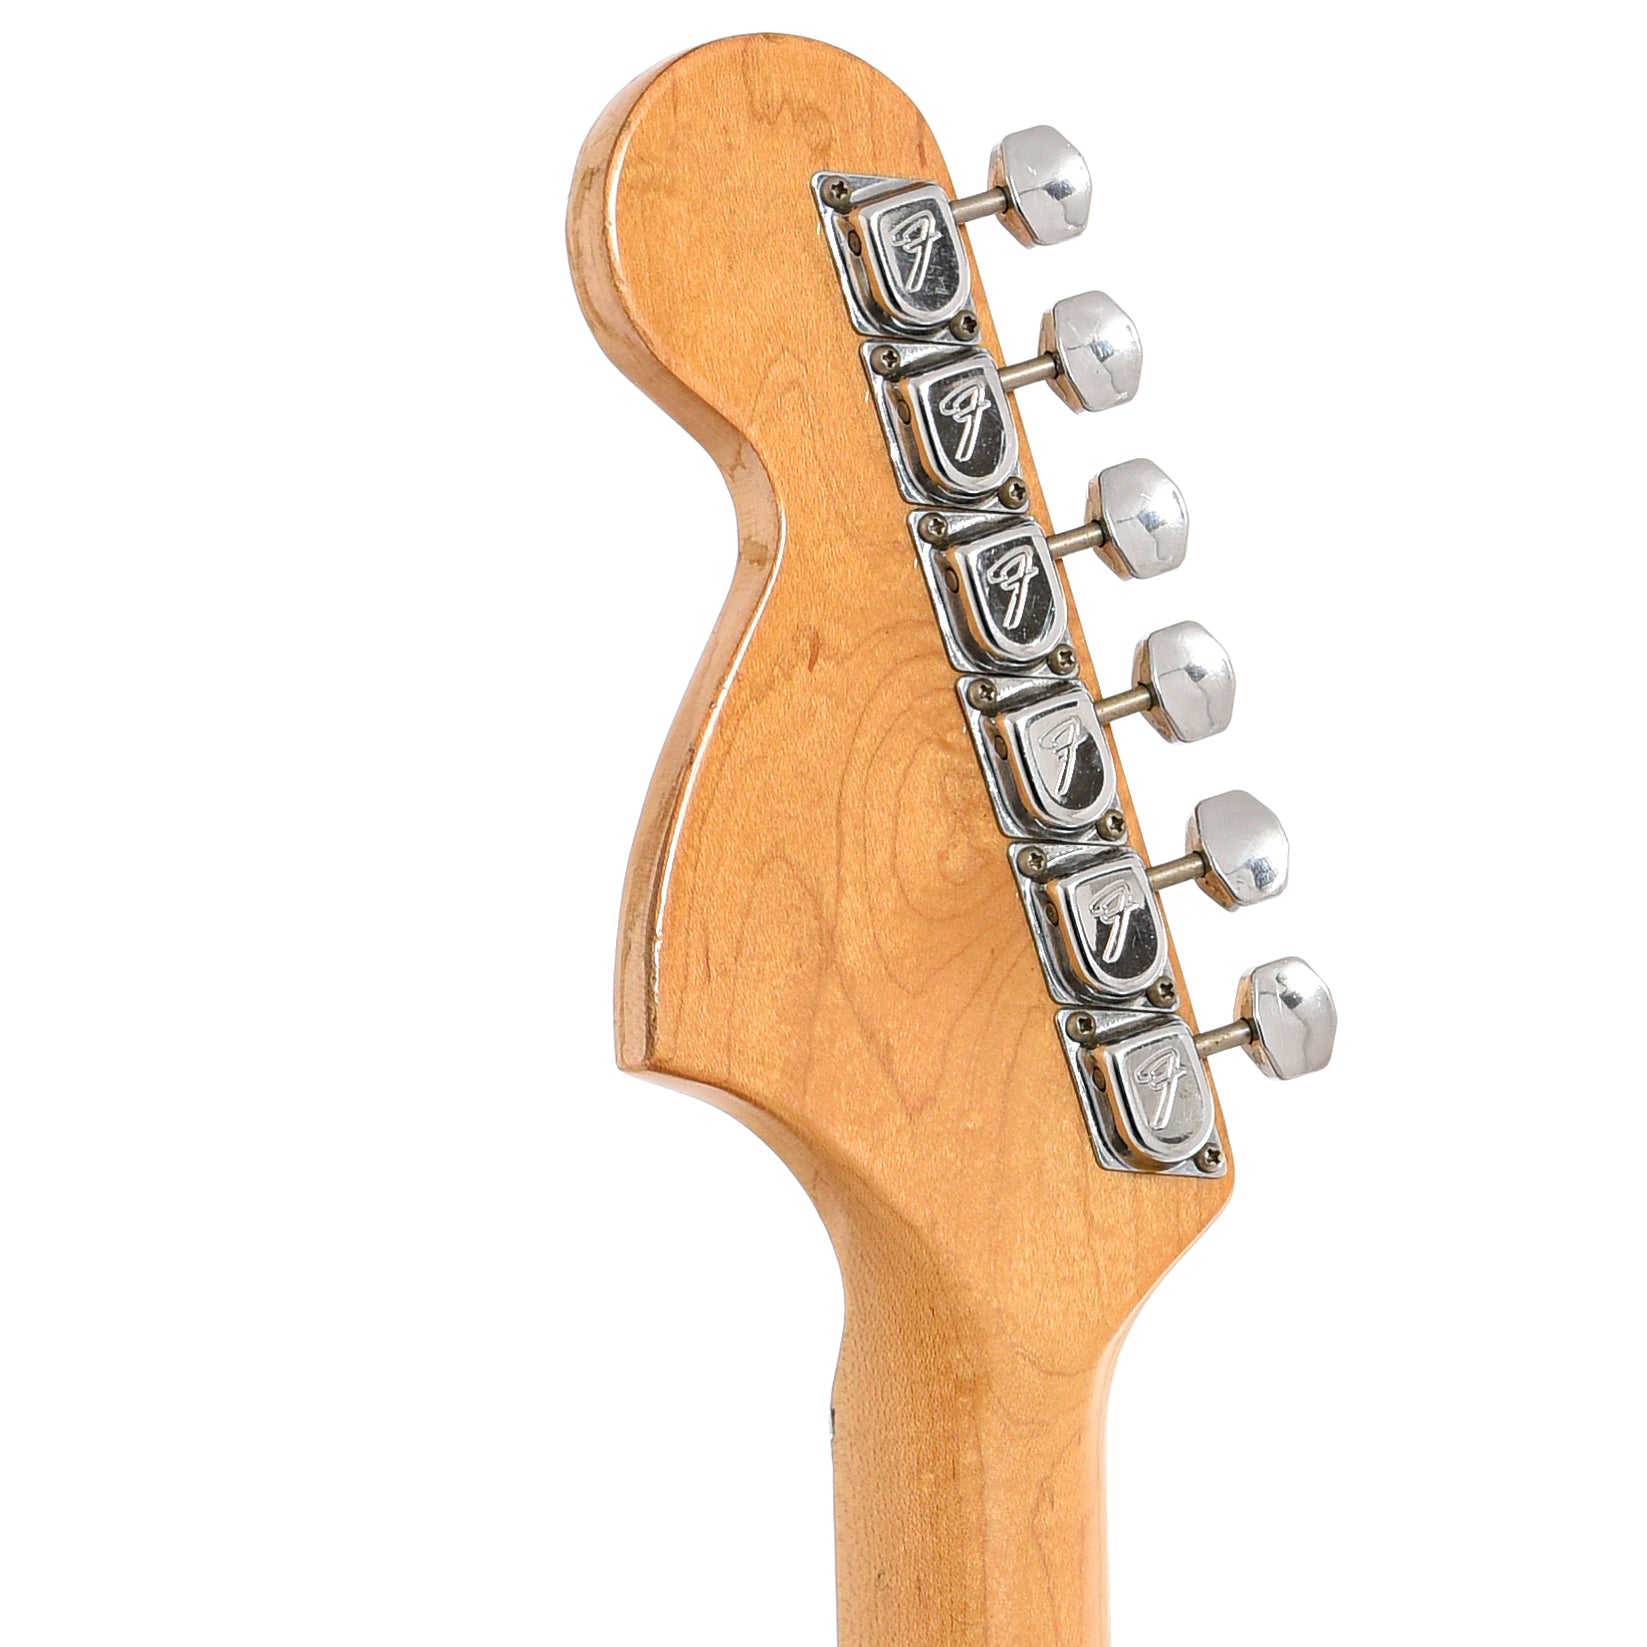 Back headstock of Fender Stratocaster Electric Guitar